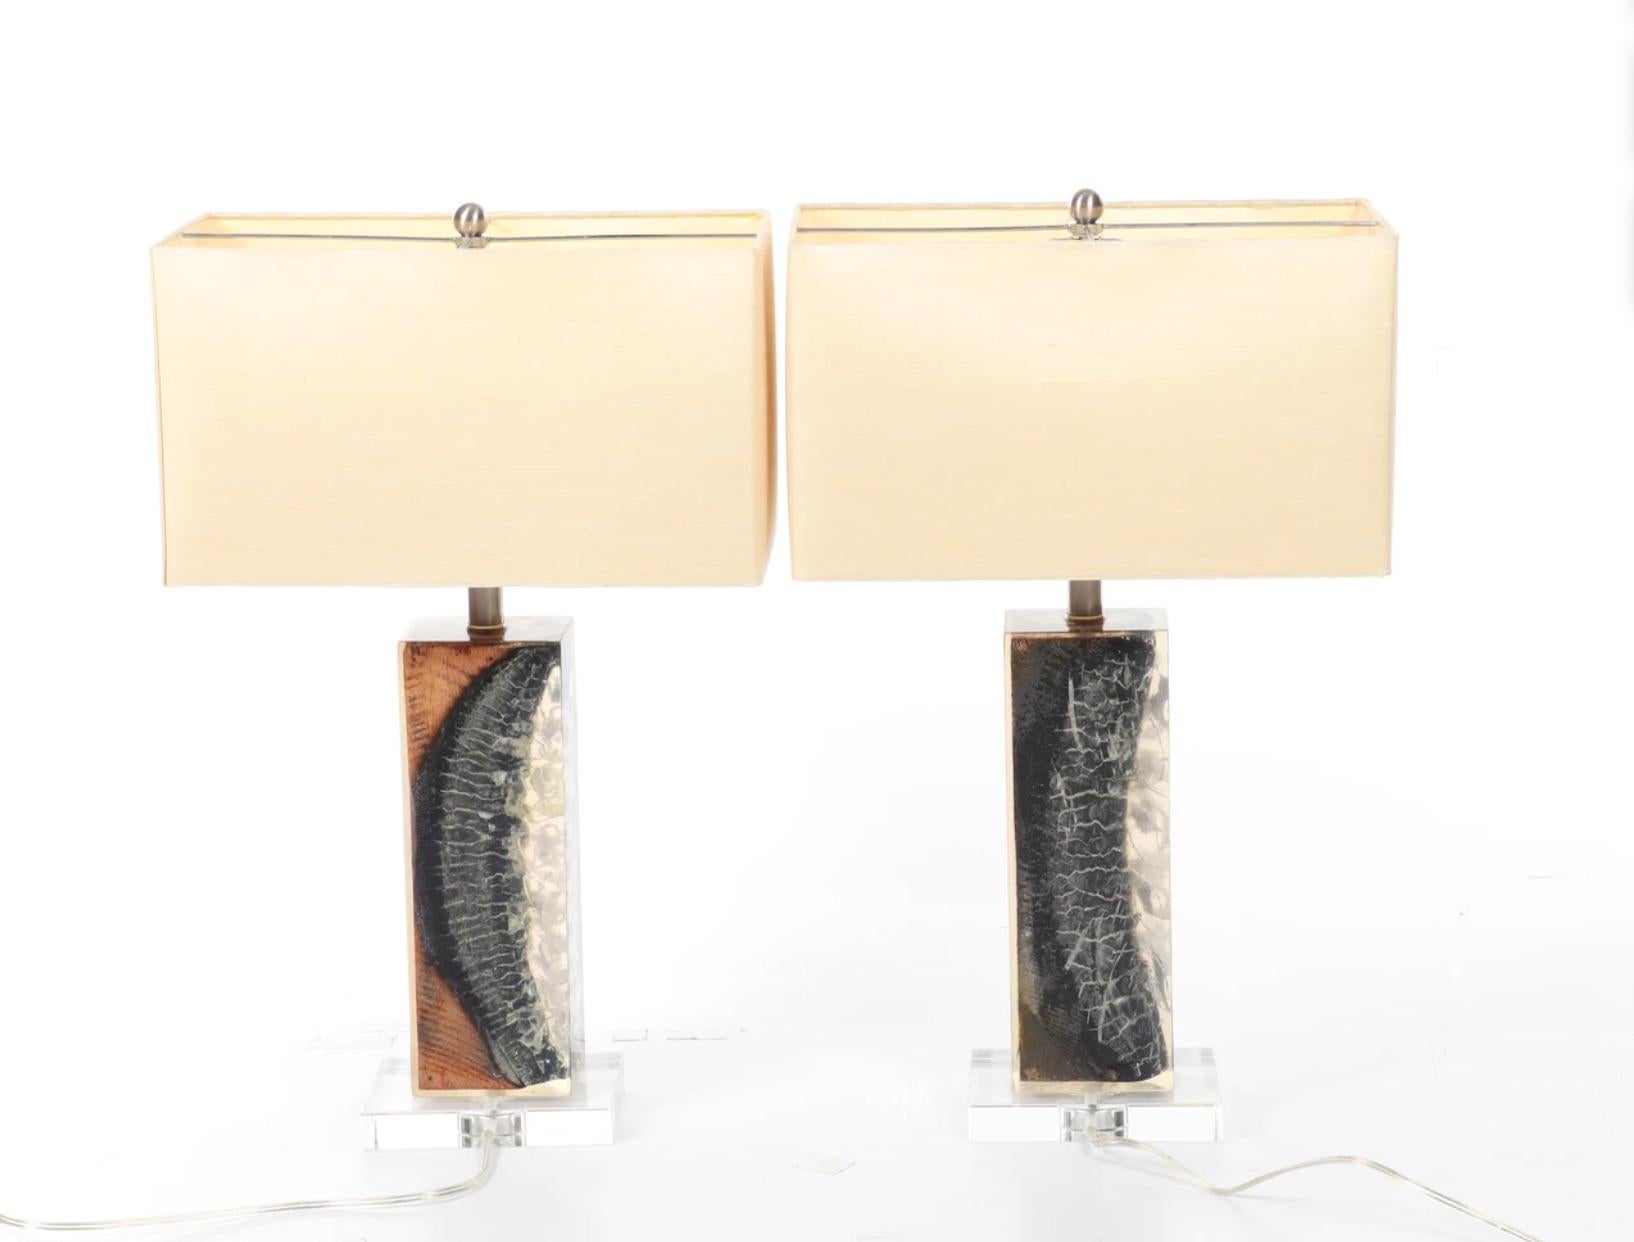 Incredible modern organic superb pair of authentic petrified wood encased in Lucite mounted on a Lucite base, chrome hardware with clear wire and plug.
The petrified wood piece in each lamp has formed naturally in a unique pattern stunning to view,